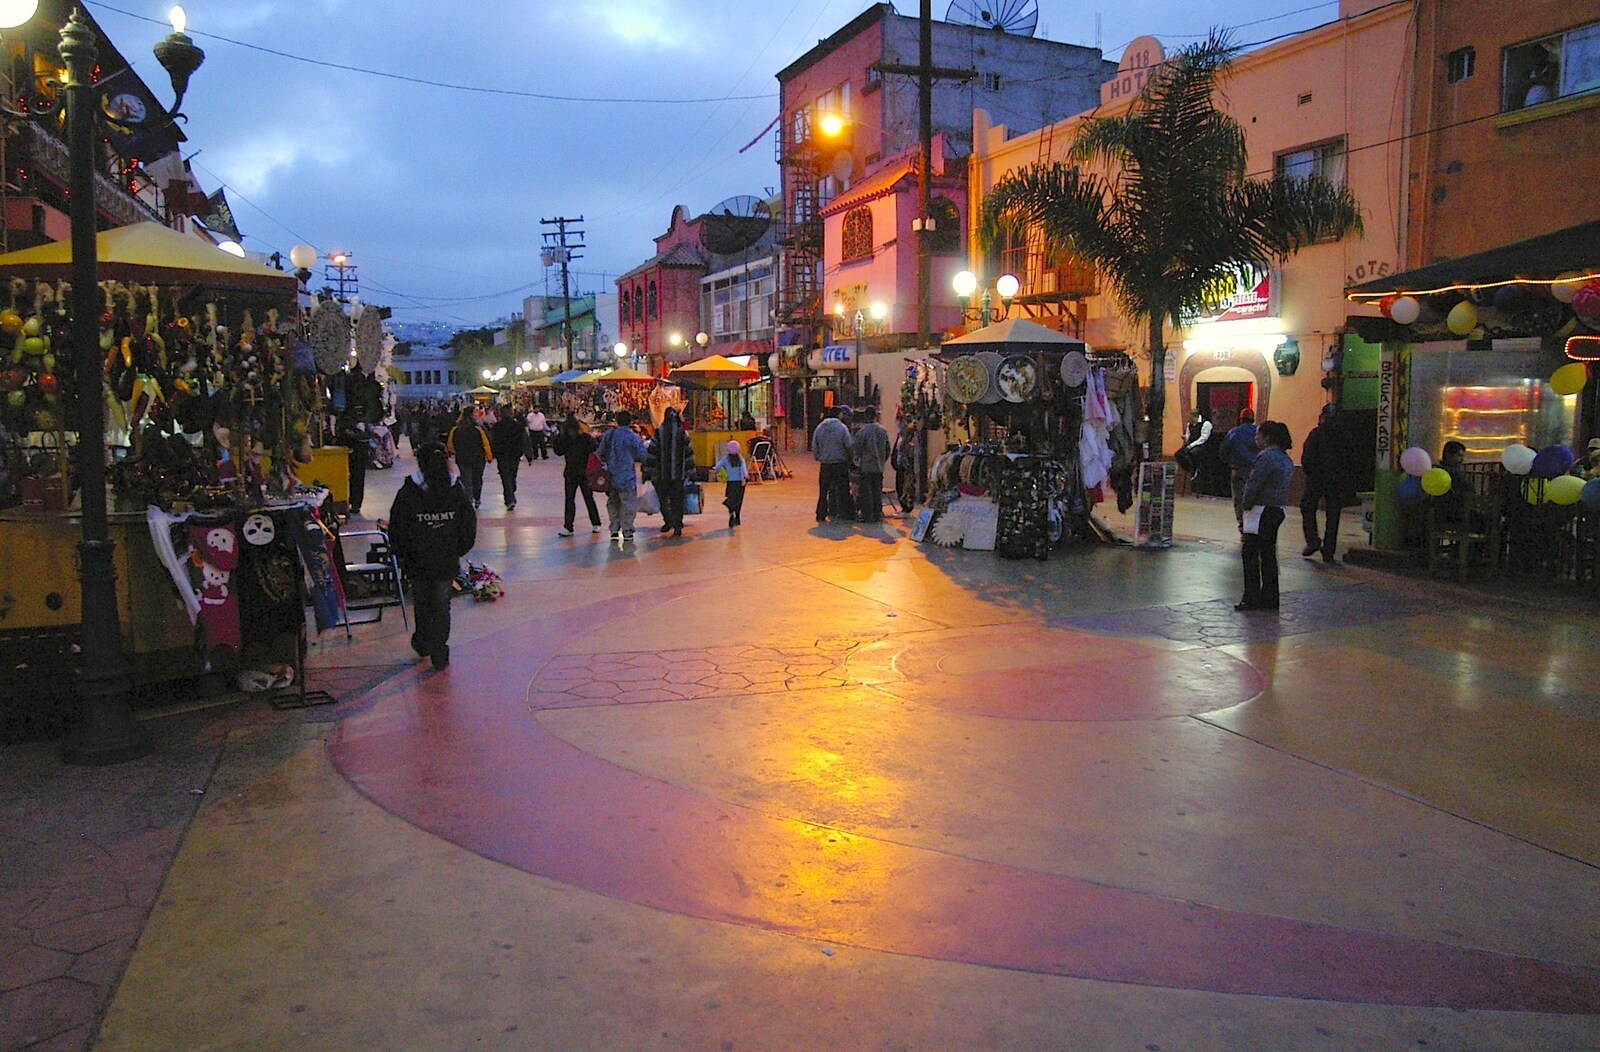 Funky backstreets, alive with market stalls from A Trip to Tijuana, Mexico - 25th March 2006